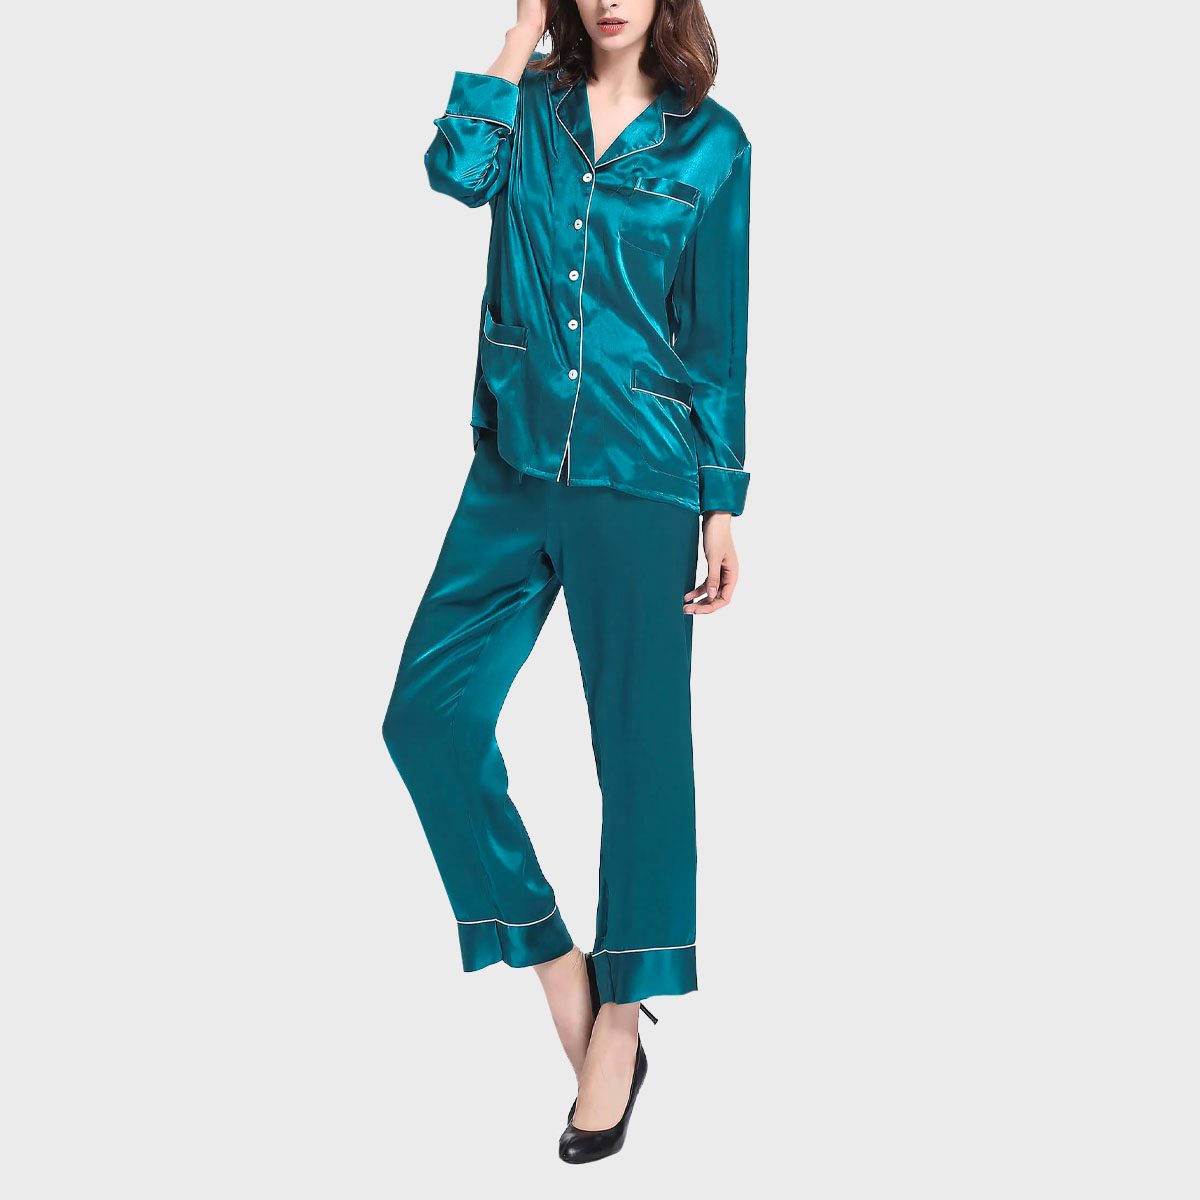 LilySilk Silk Pajamas for Women with Contrast Trimming